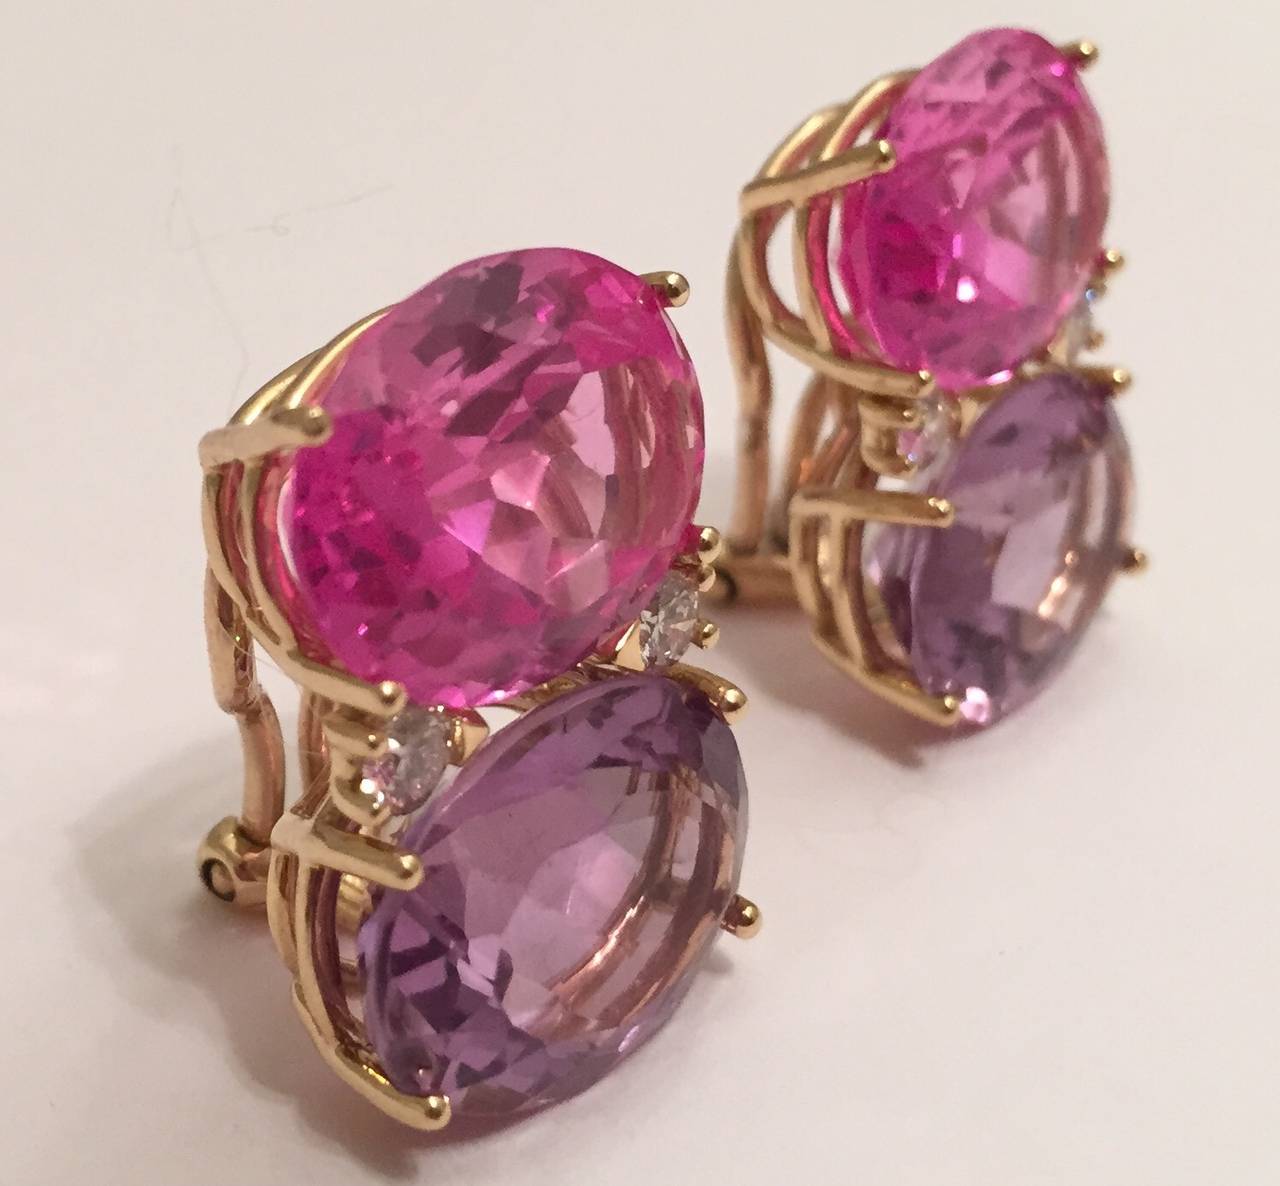 18kt Yellow Gold Grande GUM DROP™ Earrings with Pink Topaz and Amethyst and diamonds ~0.60cts - The biggest of the GUM DROP™ Earring Collection!

Both stones are of equal size - measuring 5/8